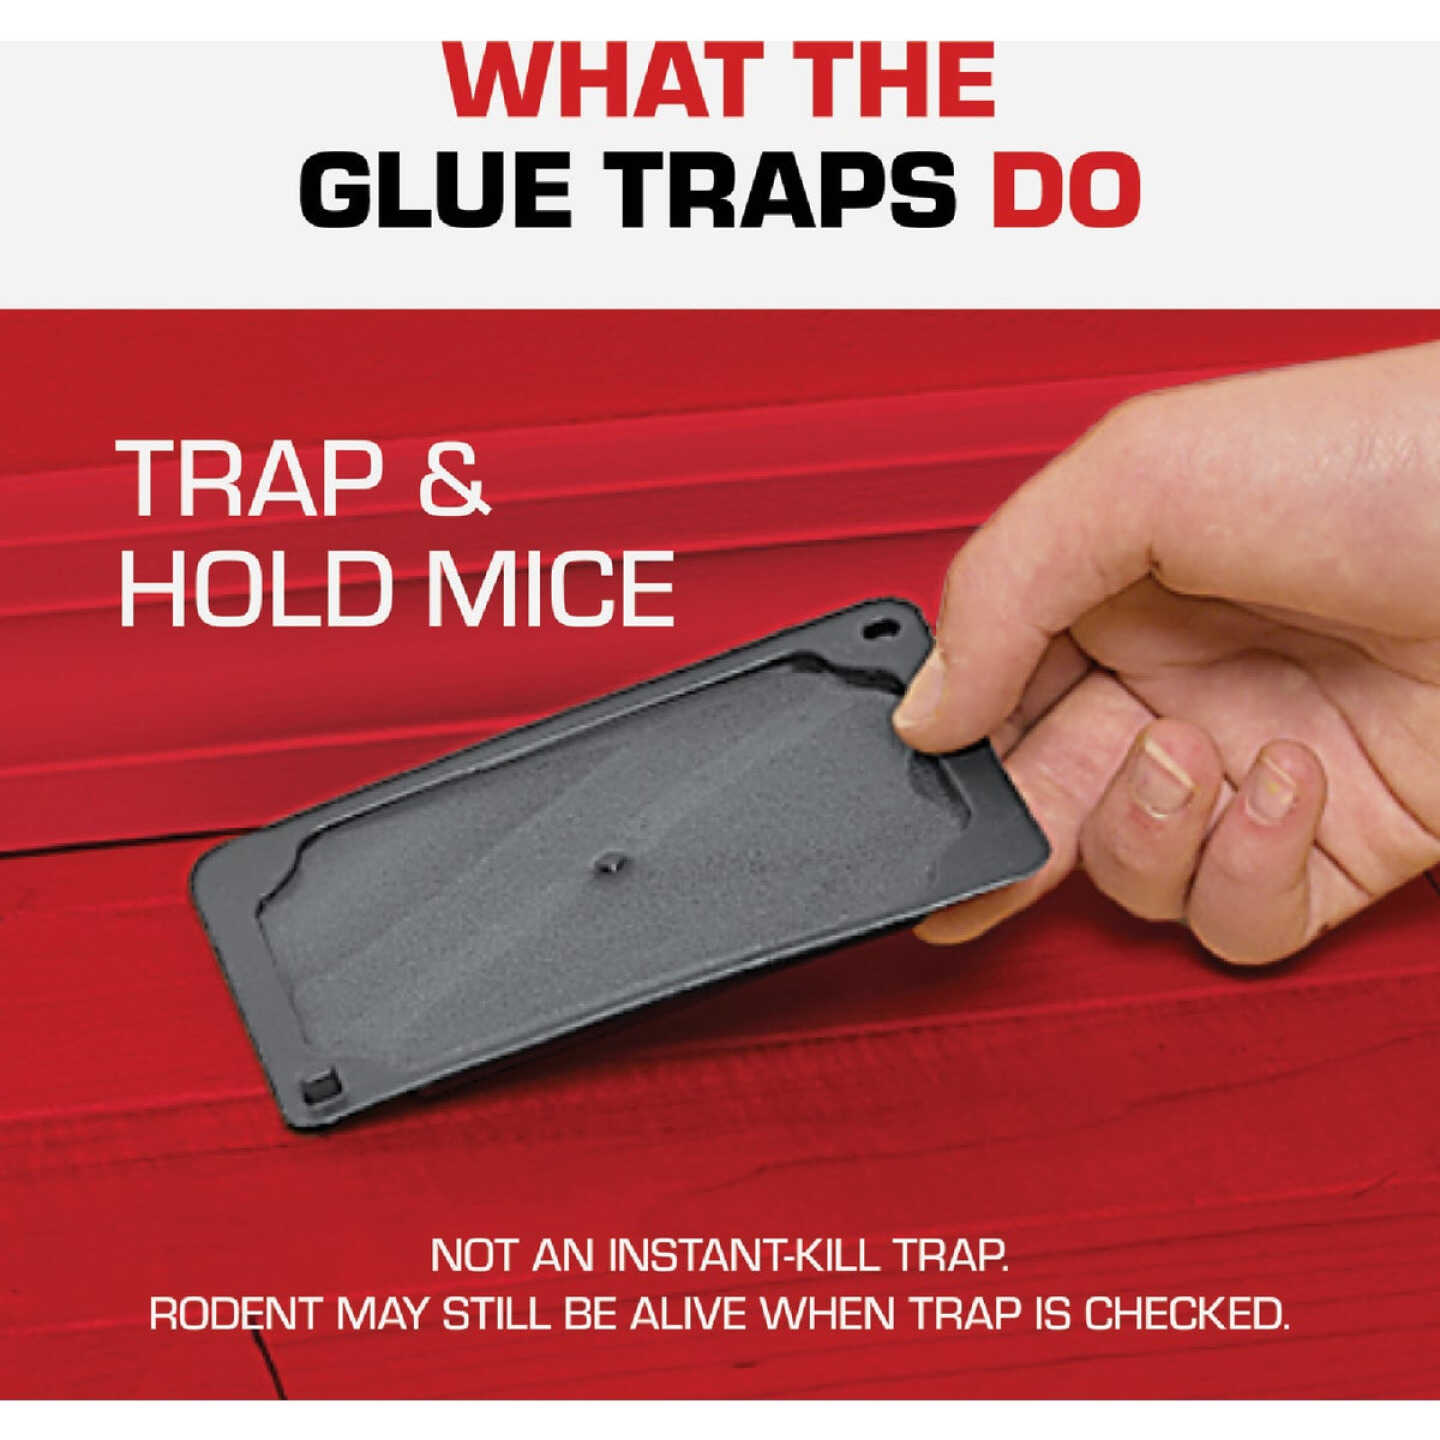 Tomcat Super Hold Glue Traps Mouse Size, Contains 4 Traps - Captures Mice -  Also Used for Cockroaches, Scorpions, Spiders and Many Other Pests (Pack